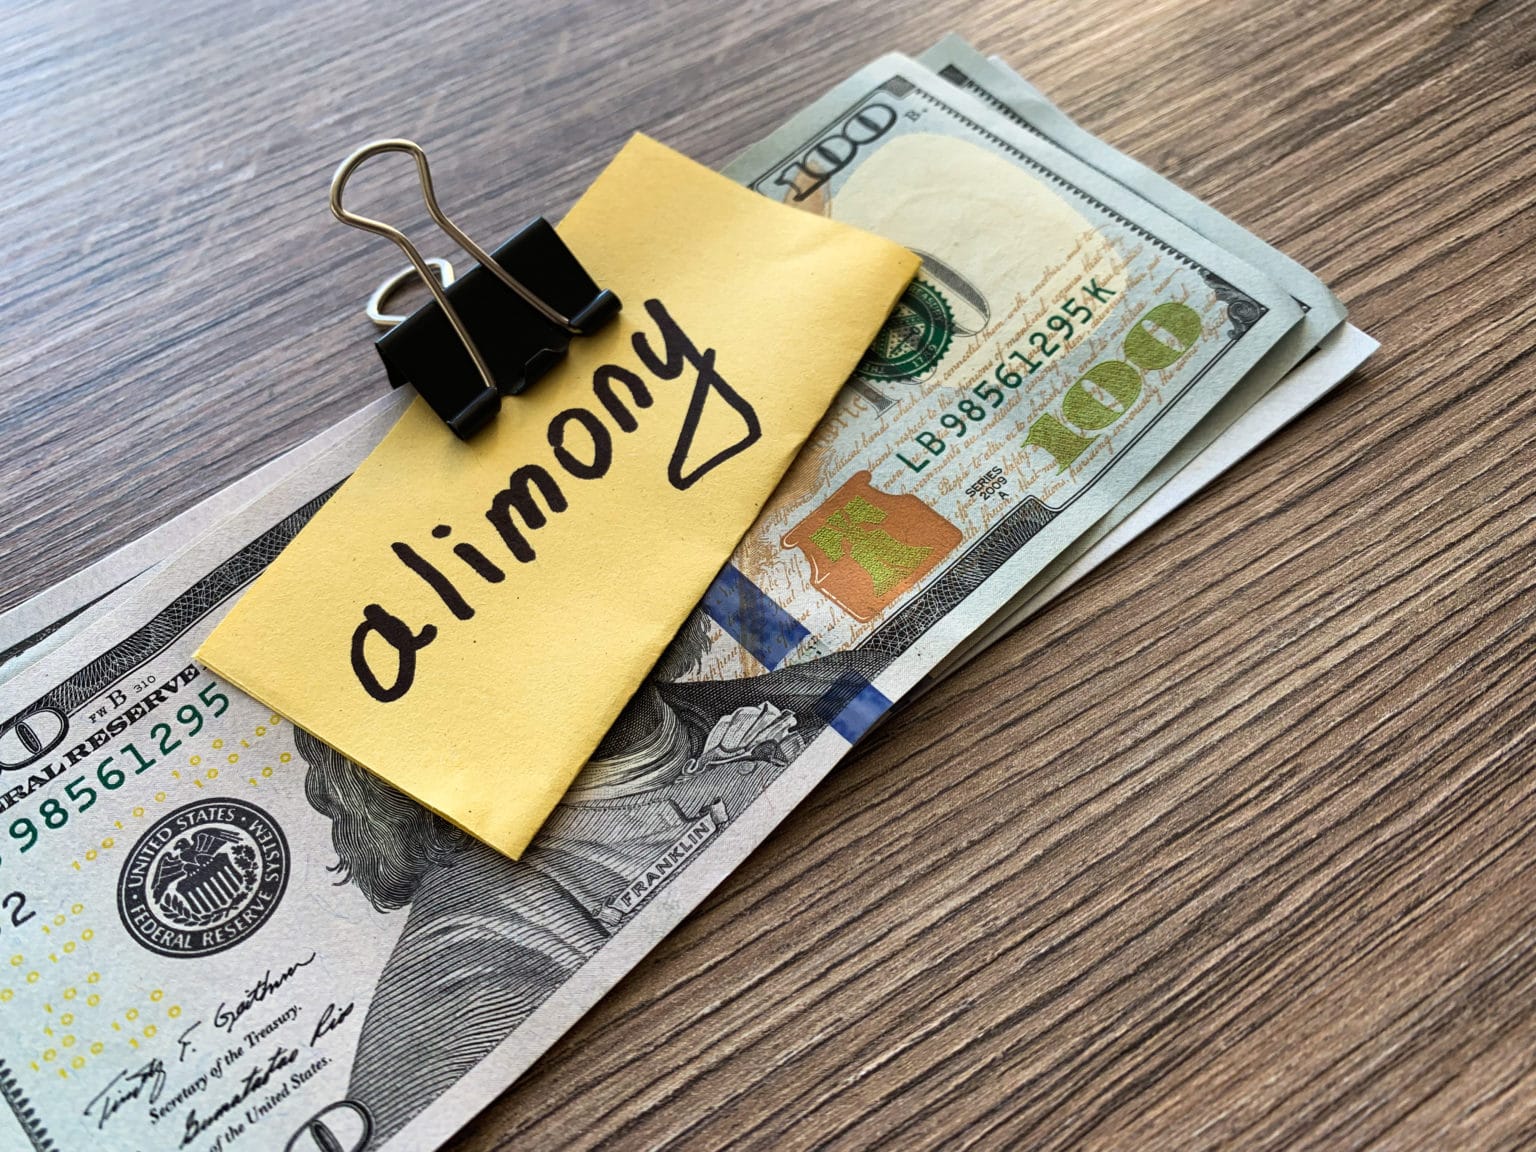 “ALIMONY” DOES IT REALLY MEAN “ALL THE MONEY?” Hoffman, Larin and